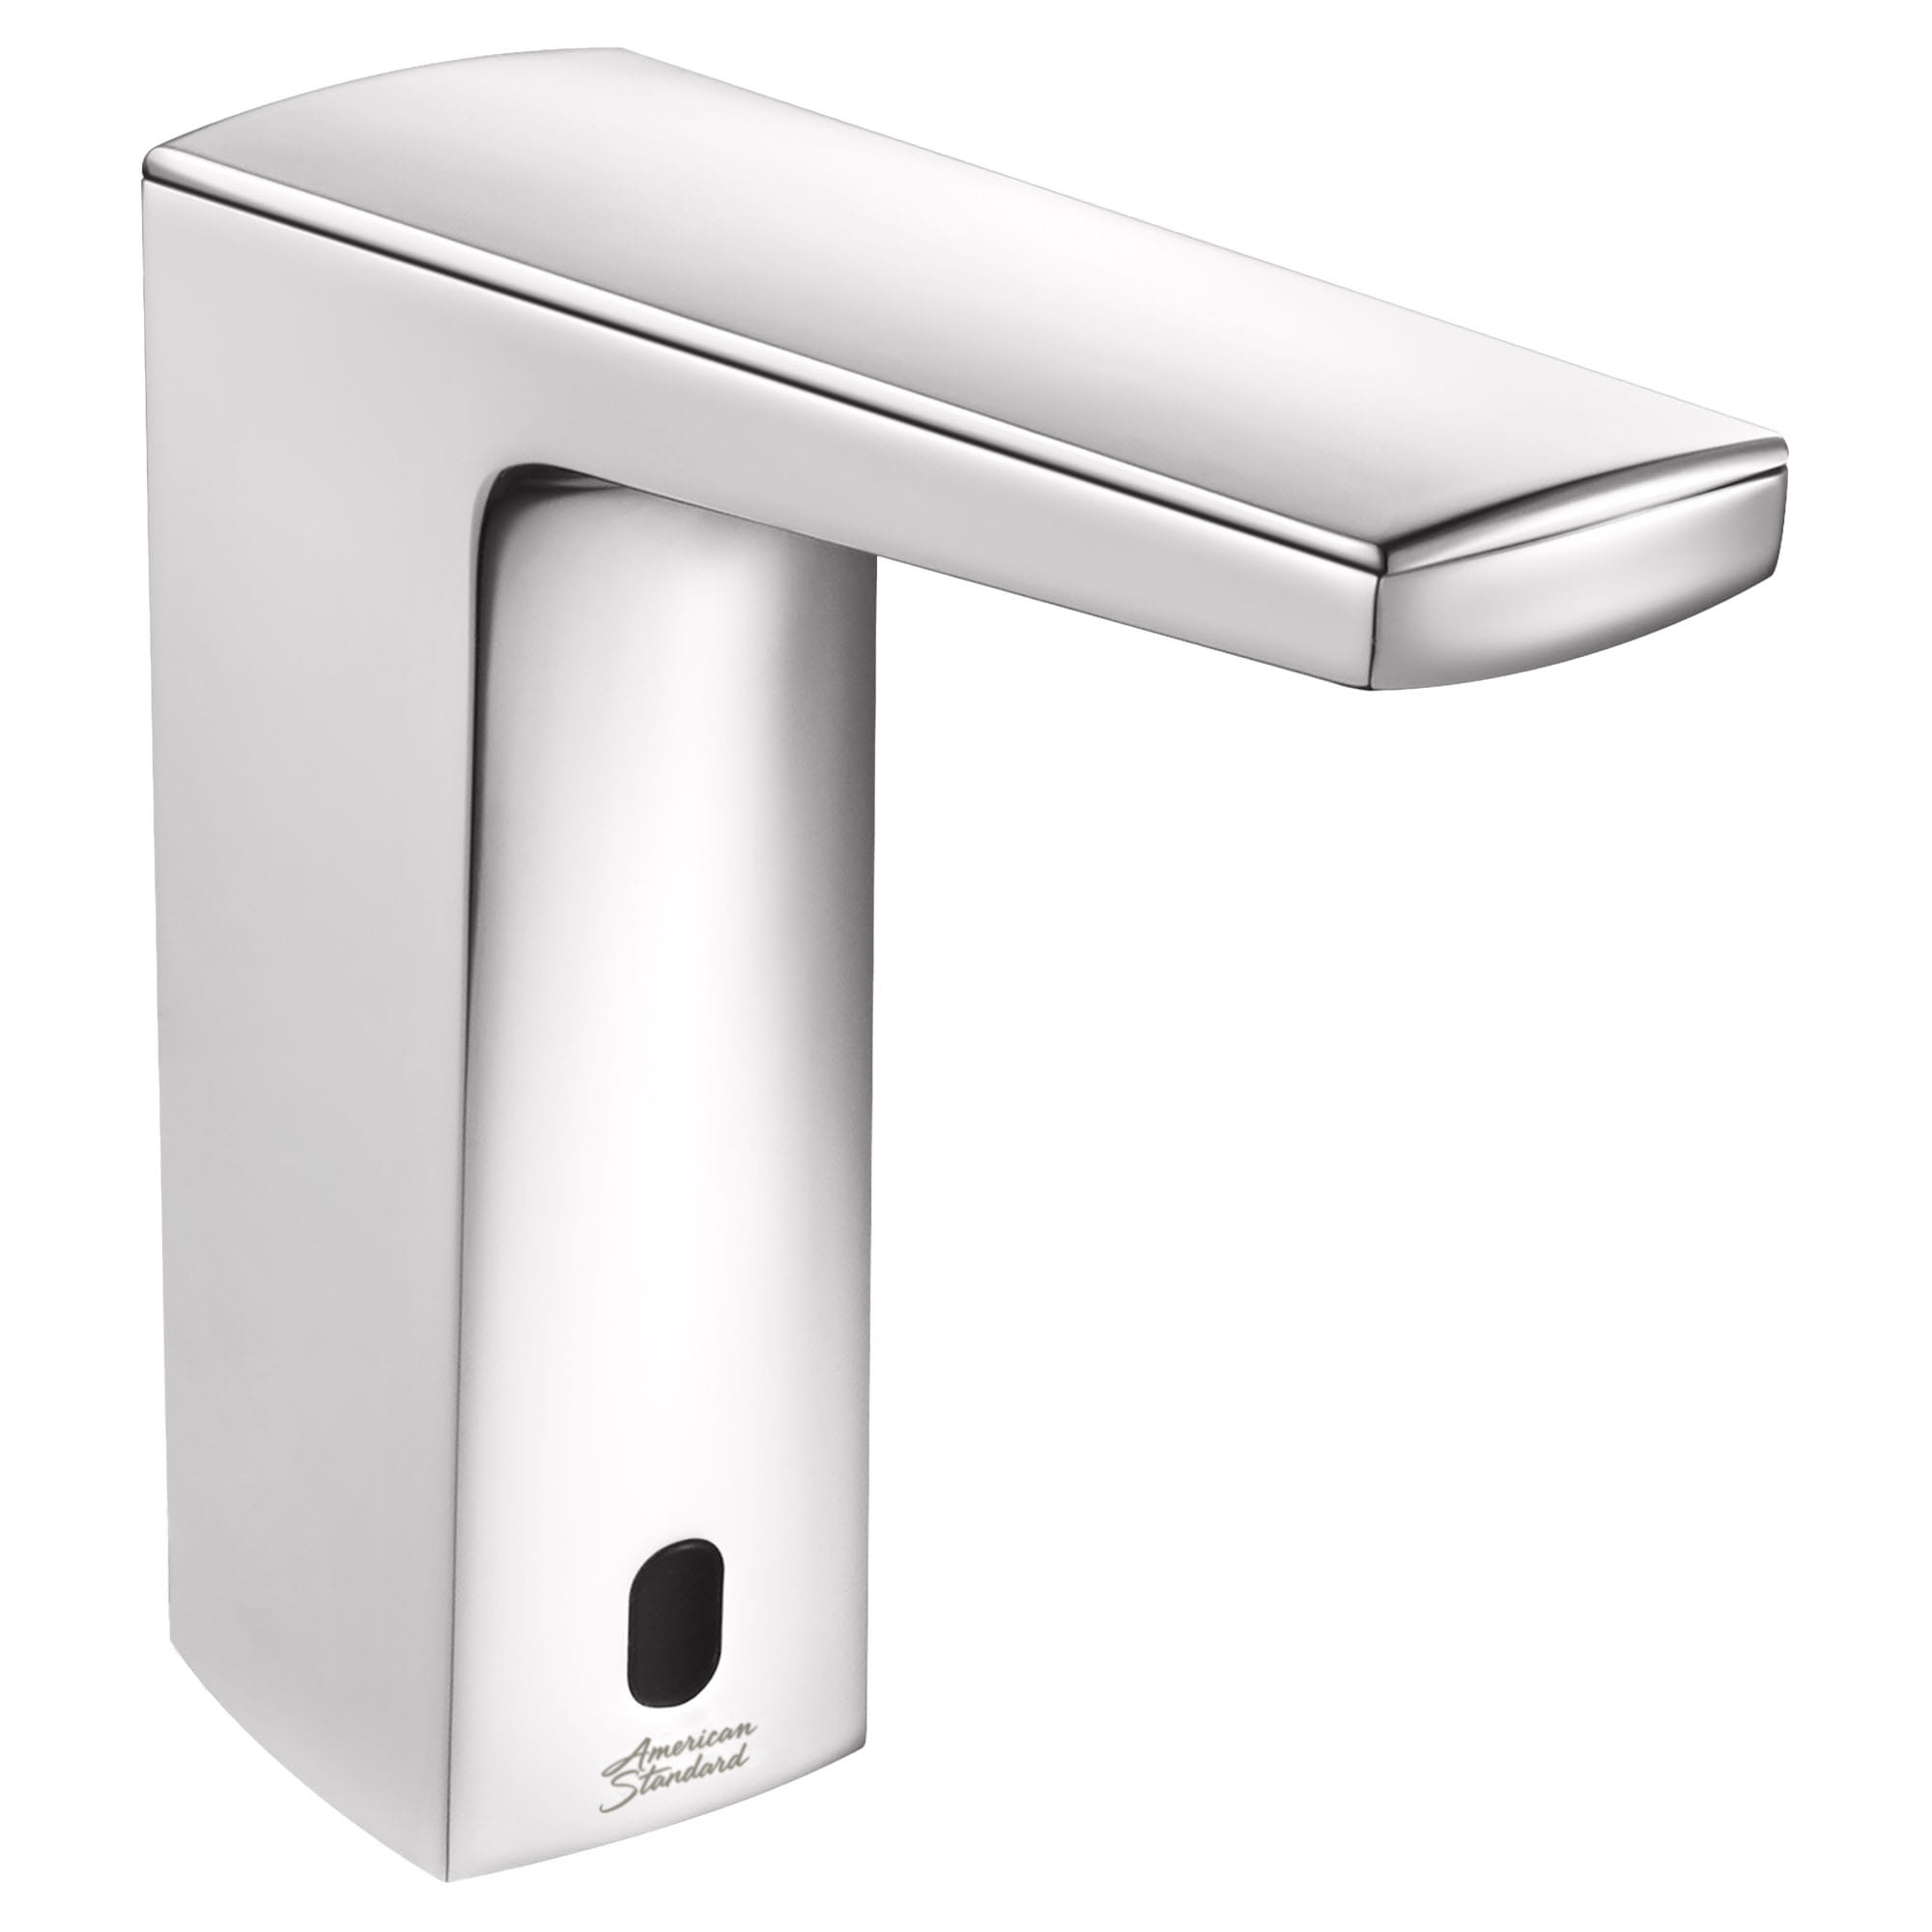 Paradigm® Selectronic® Touchless Faucet, Base Model With SmarTherm Safety Shut-Off + ADM, 0.5 gpm/1.9 Lpm